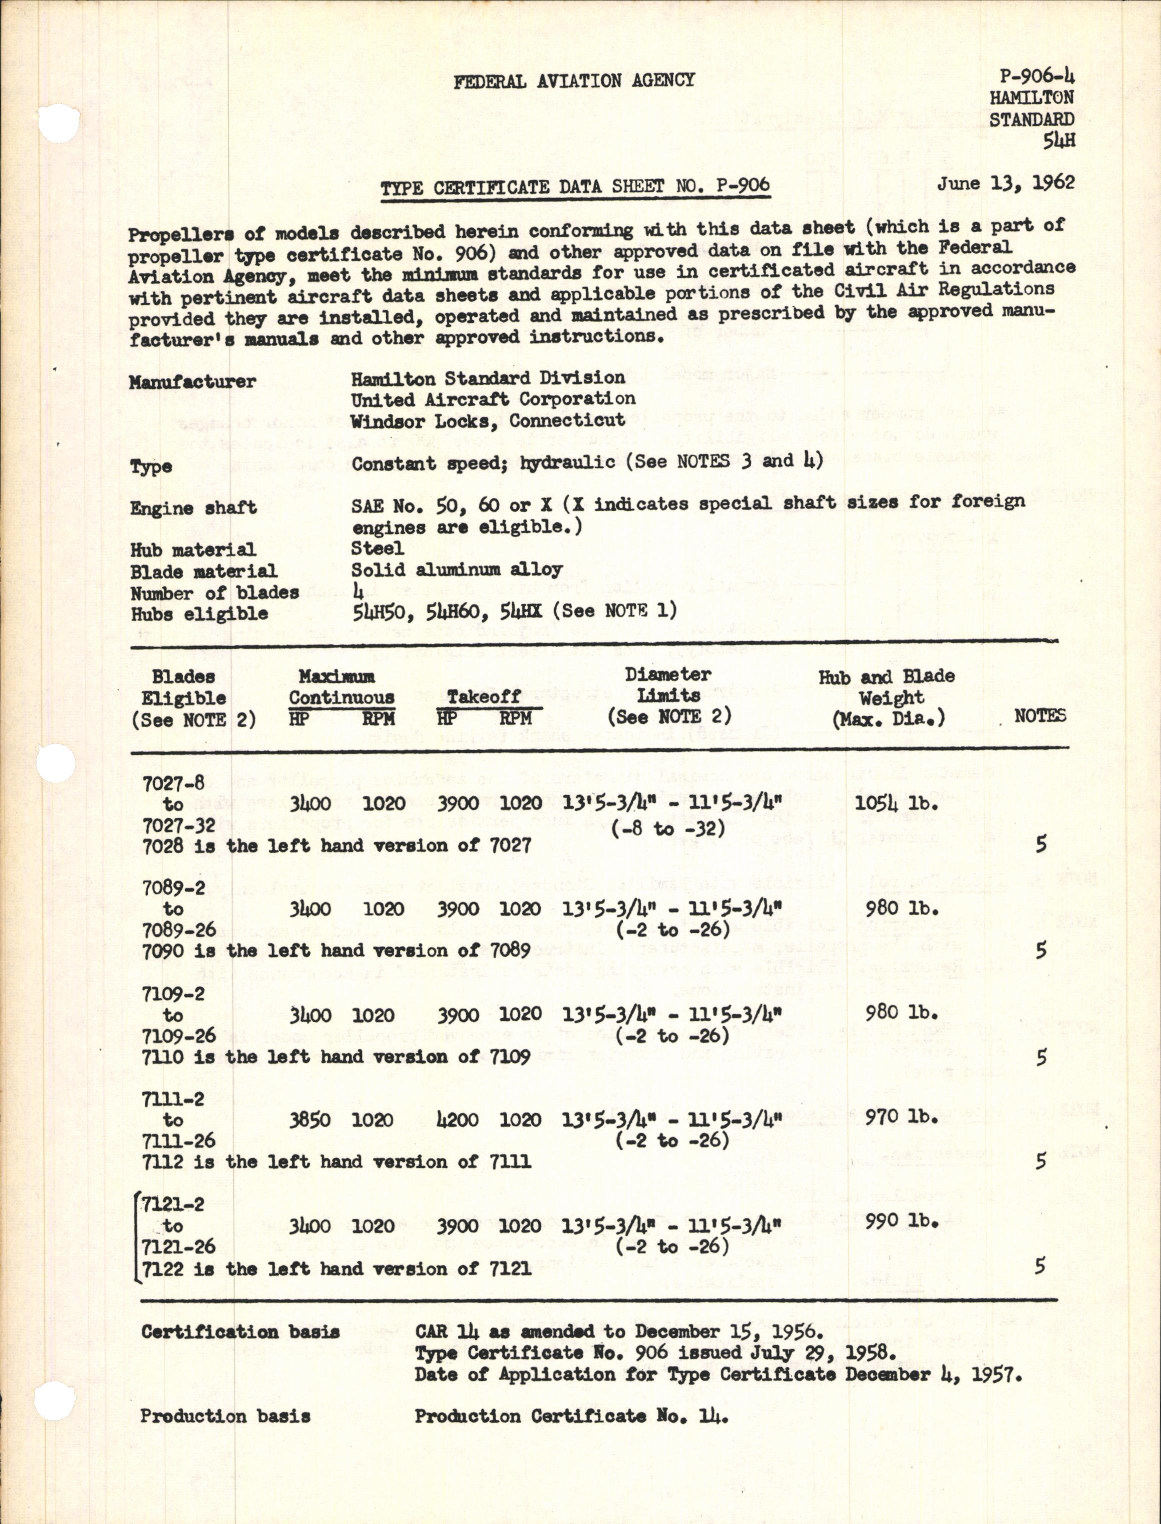 Sample page 1 from AirCorps Library document: 54H50, 54H60, and 54HX - Type Certificate 